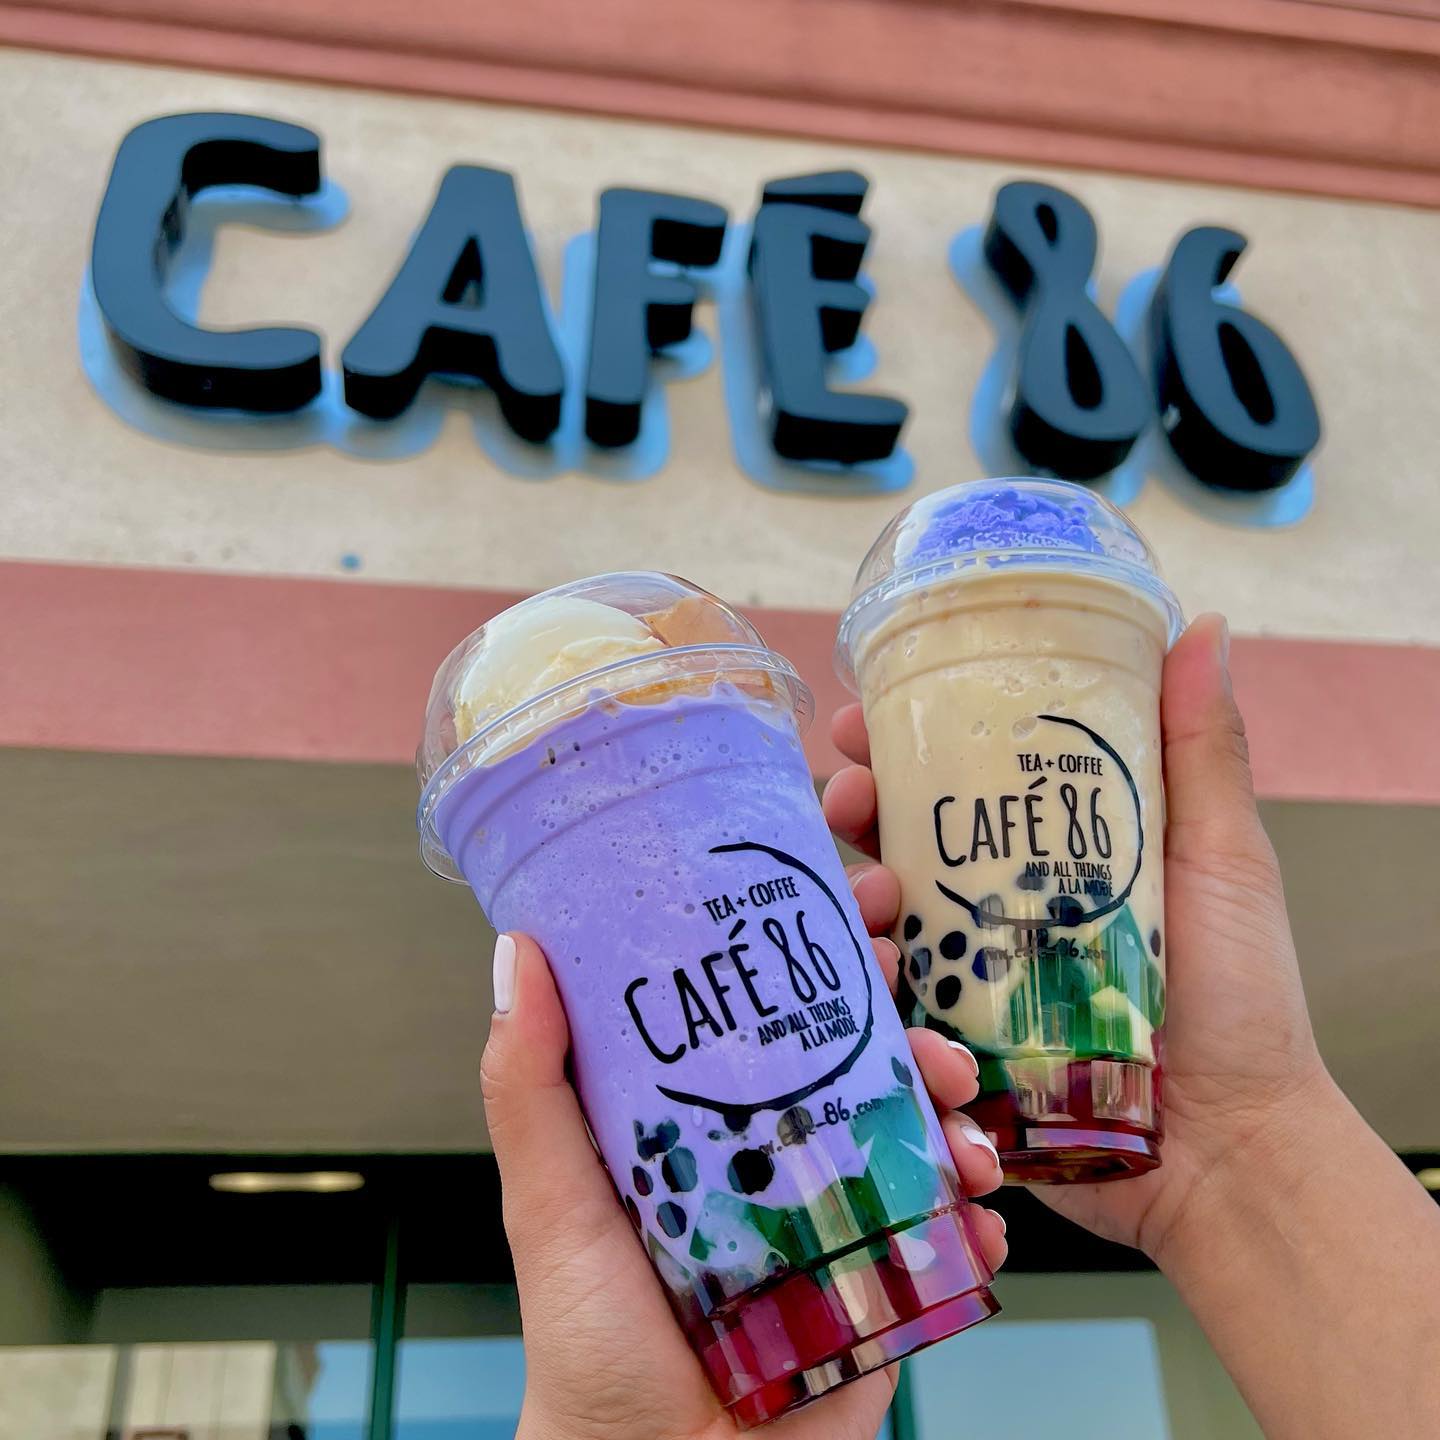 Cafe 86 spreads the ube experience to 2 new locations in Sacramento